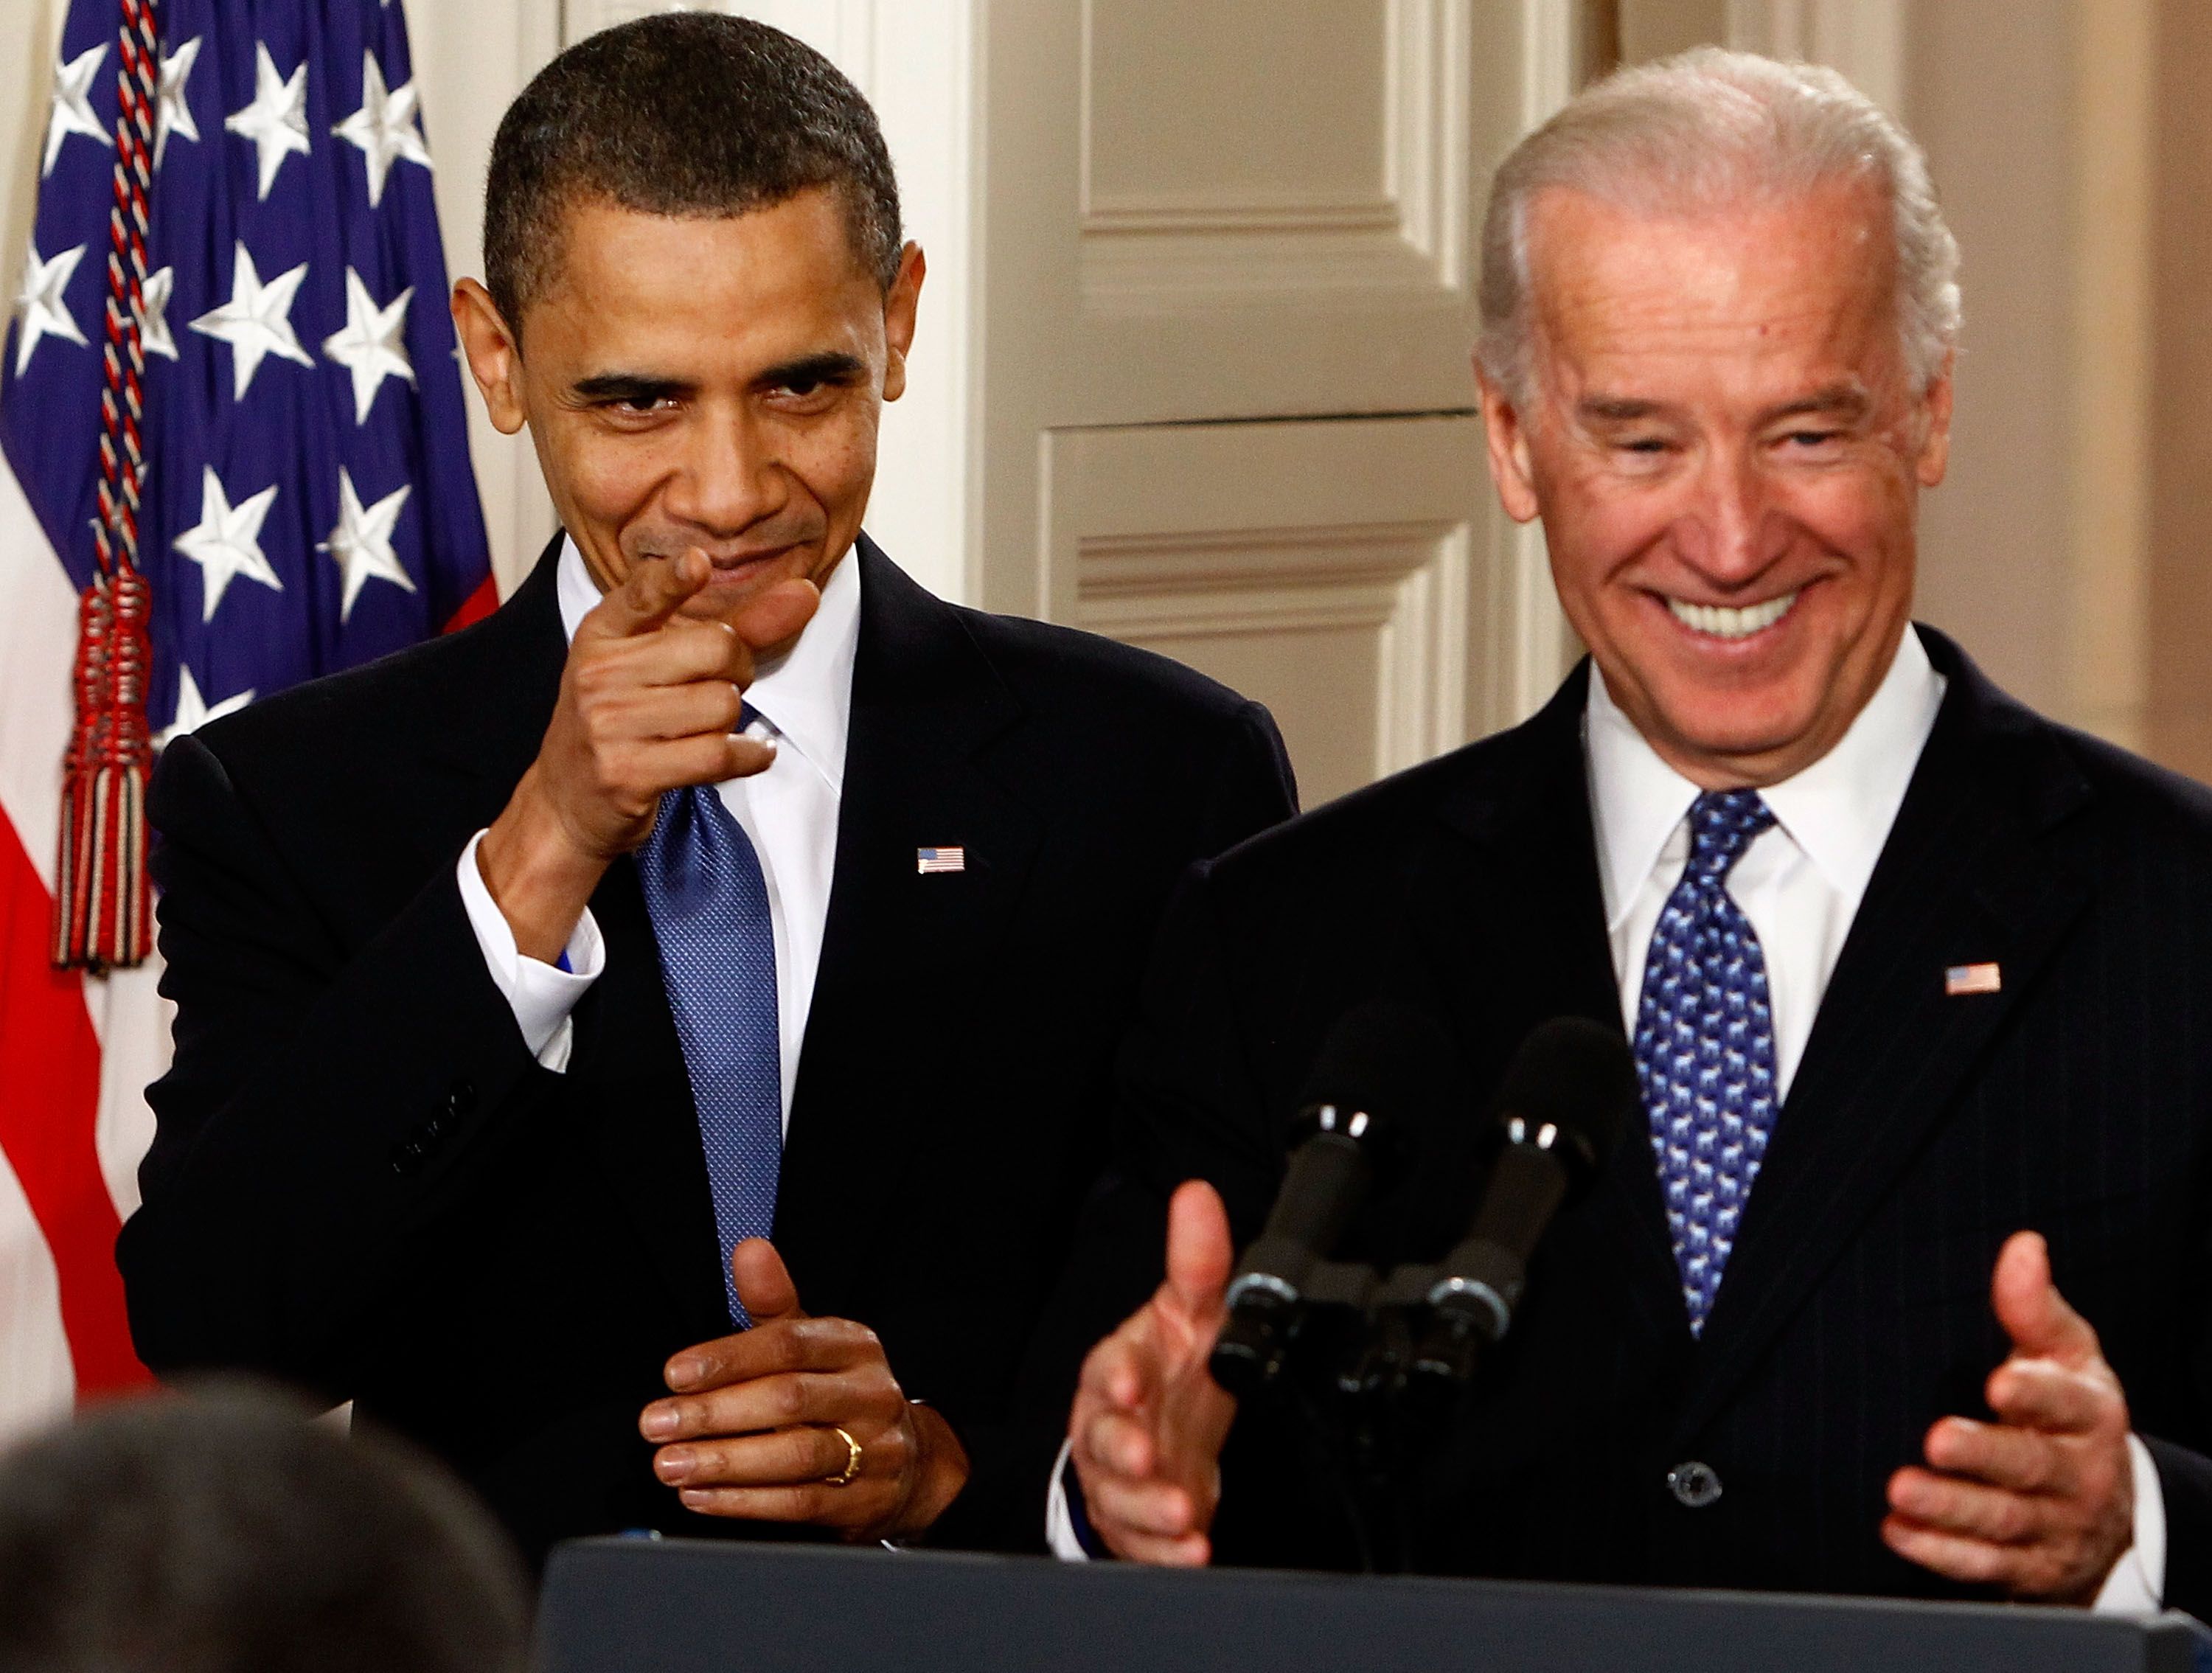 President Barack Obama and Vice President Joe Biden during the signing ceremony for the Affordable Health Care for America Act in the East Room of the White House March 23, 2010 